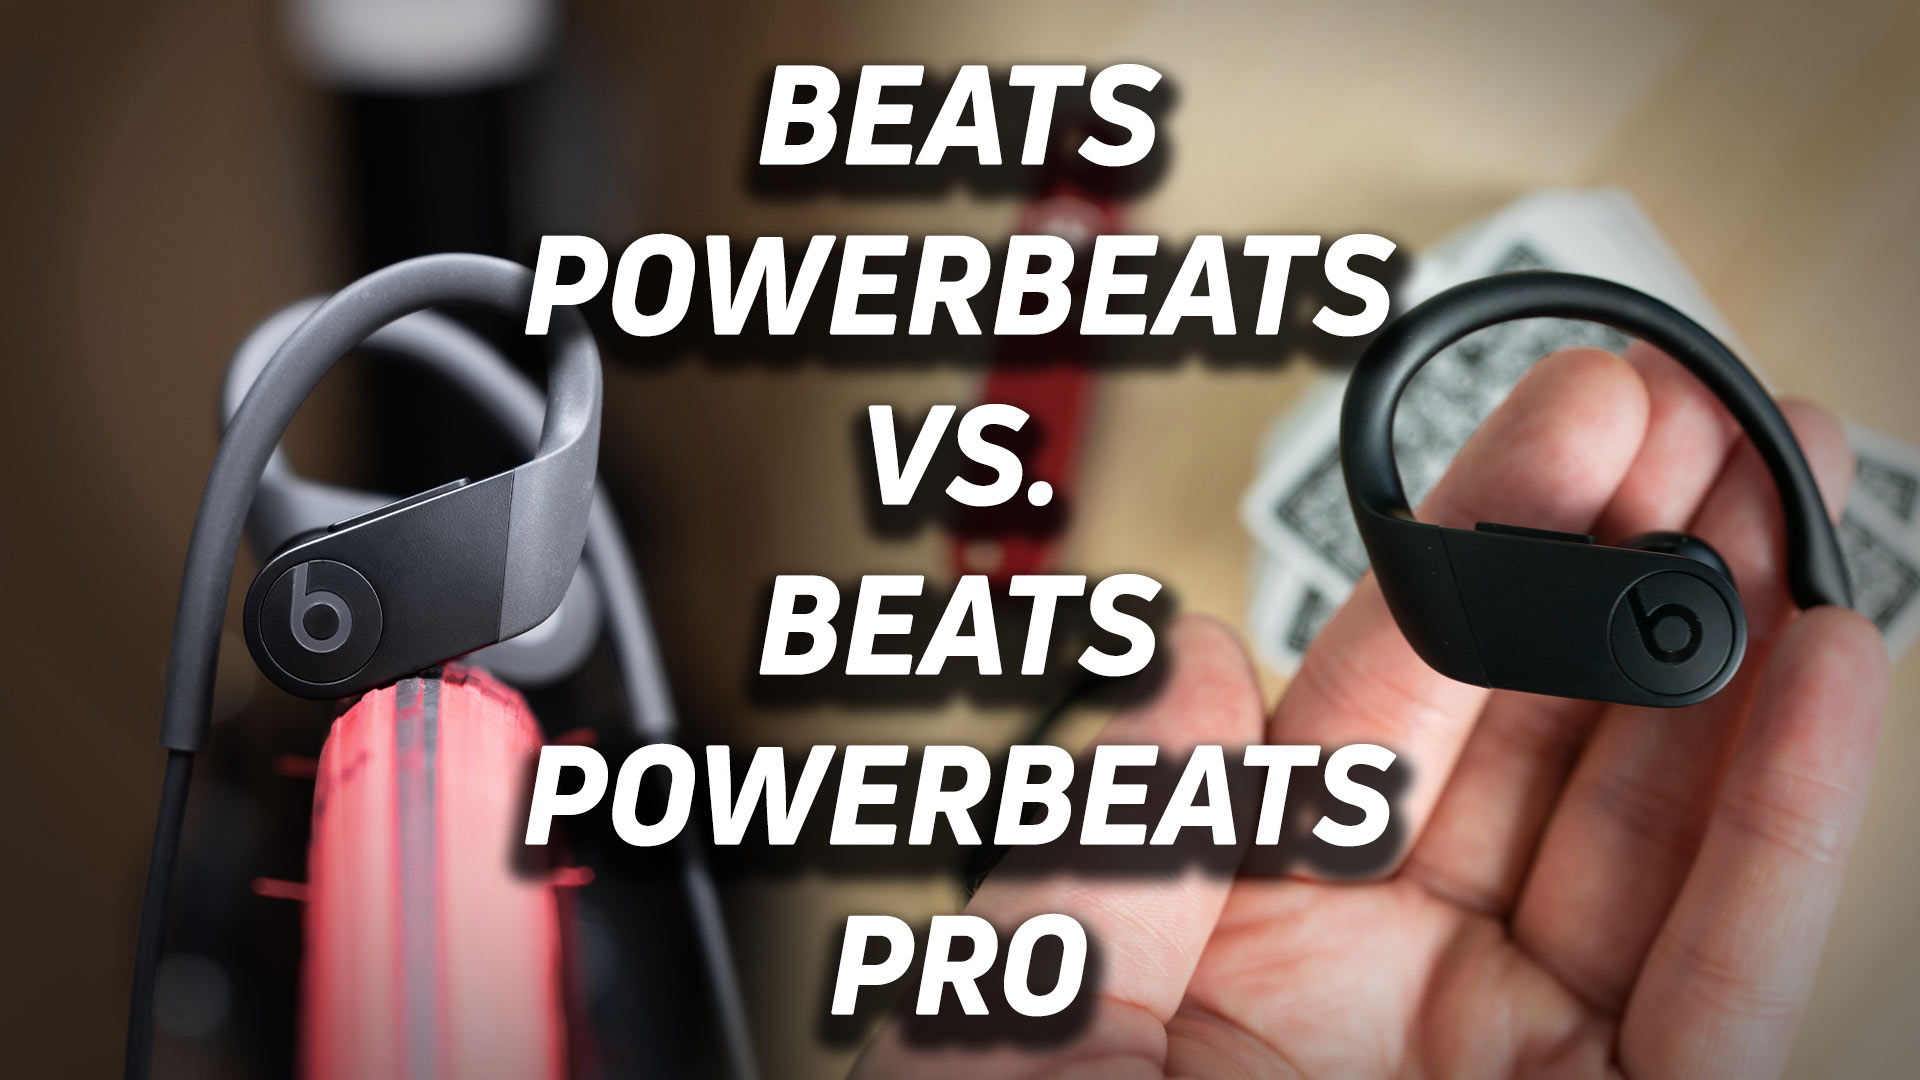 A picture of the Beats Powerbeats vs Beats Powerbeats Pro with a gradient transition between the two images.